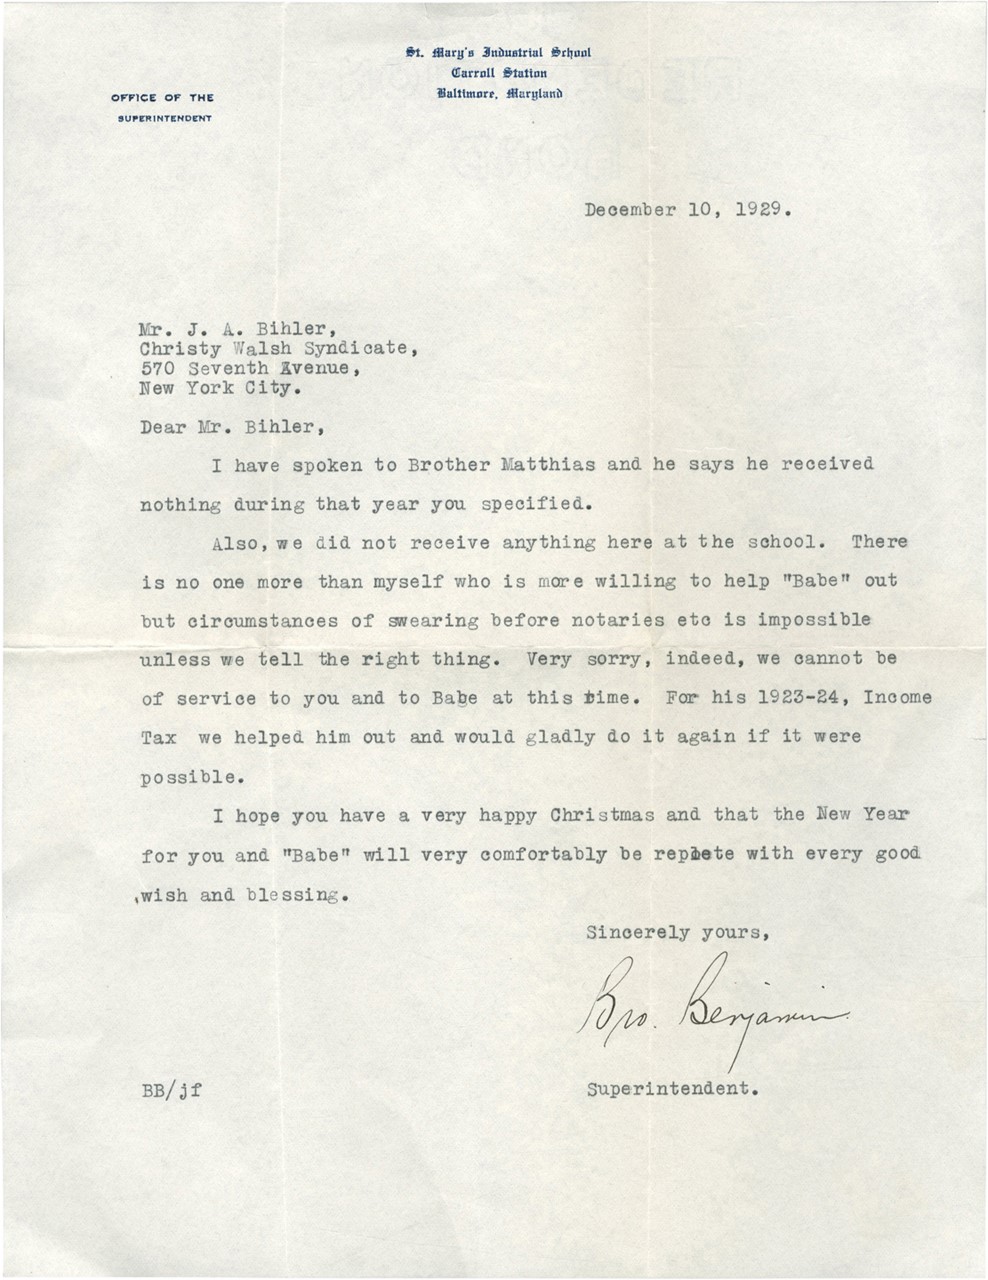 1929 St. Mary's Brother Mathias Won't Lie to Save Babe Ruth from Tax Problems Letter